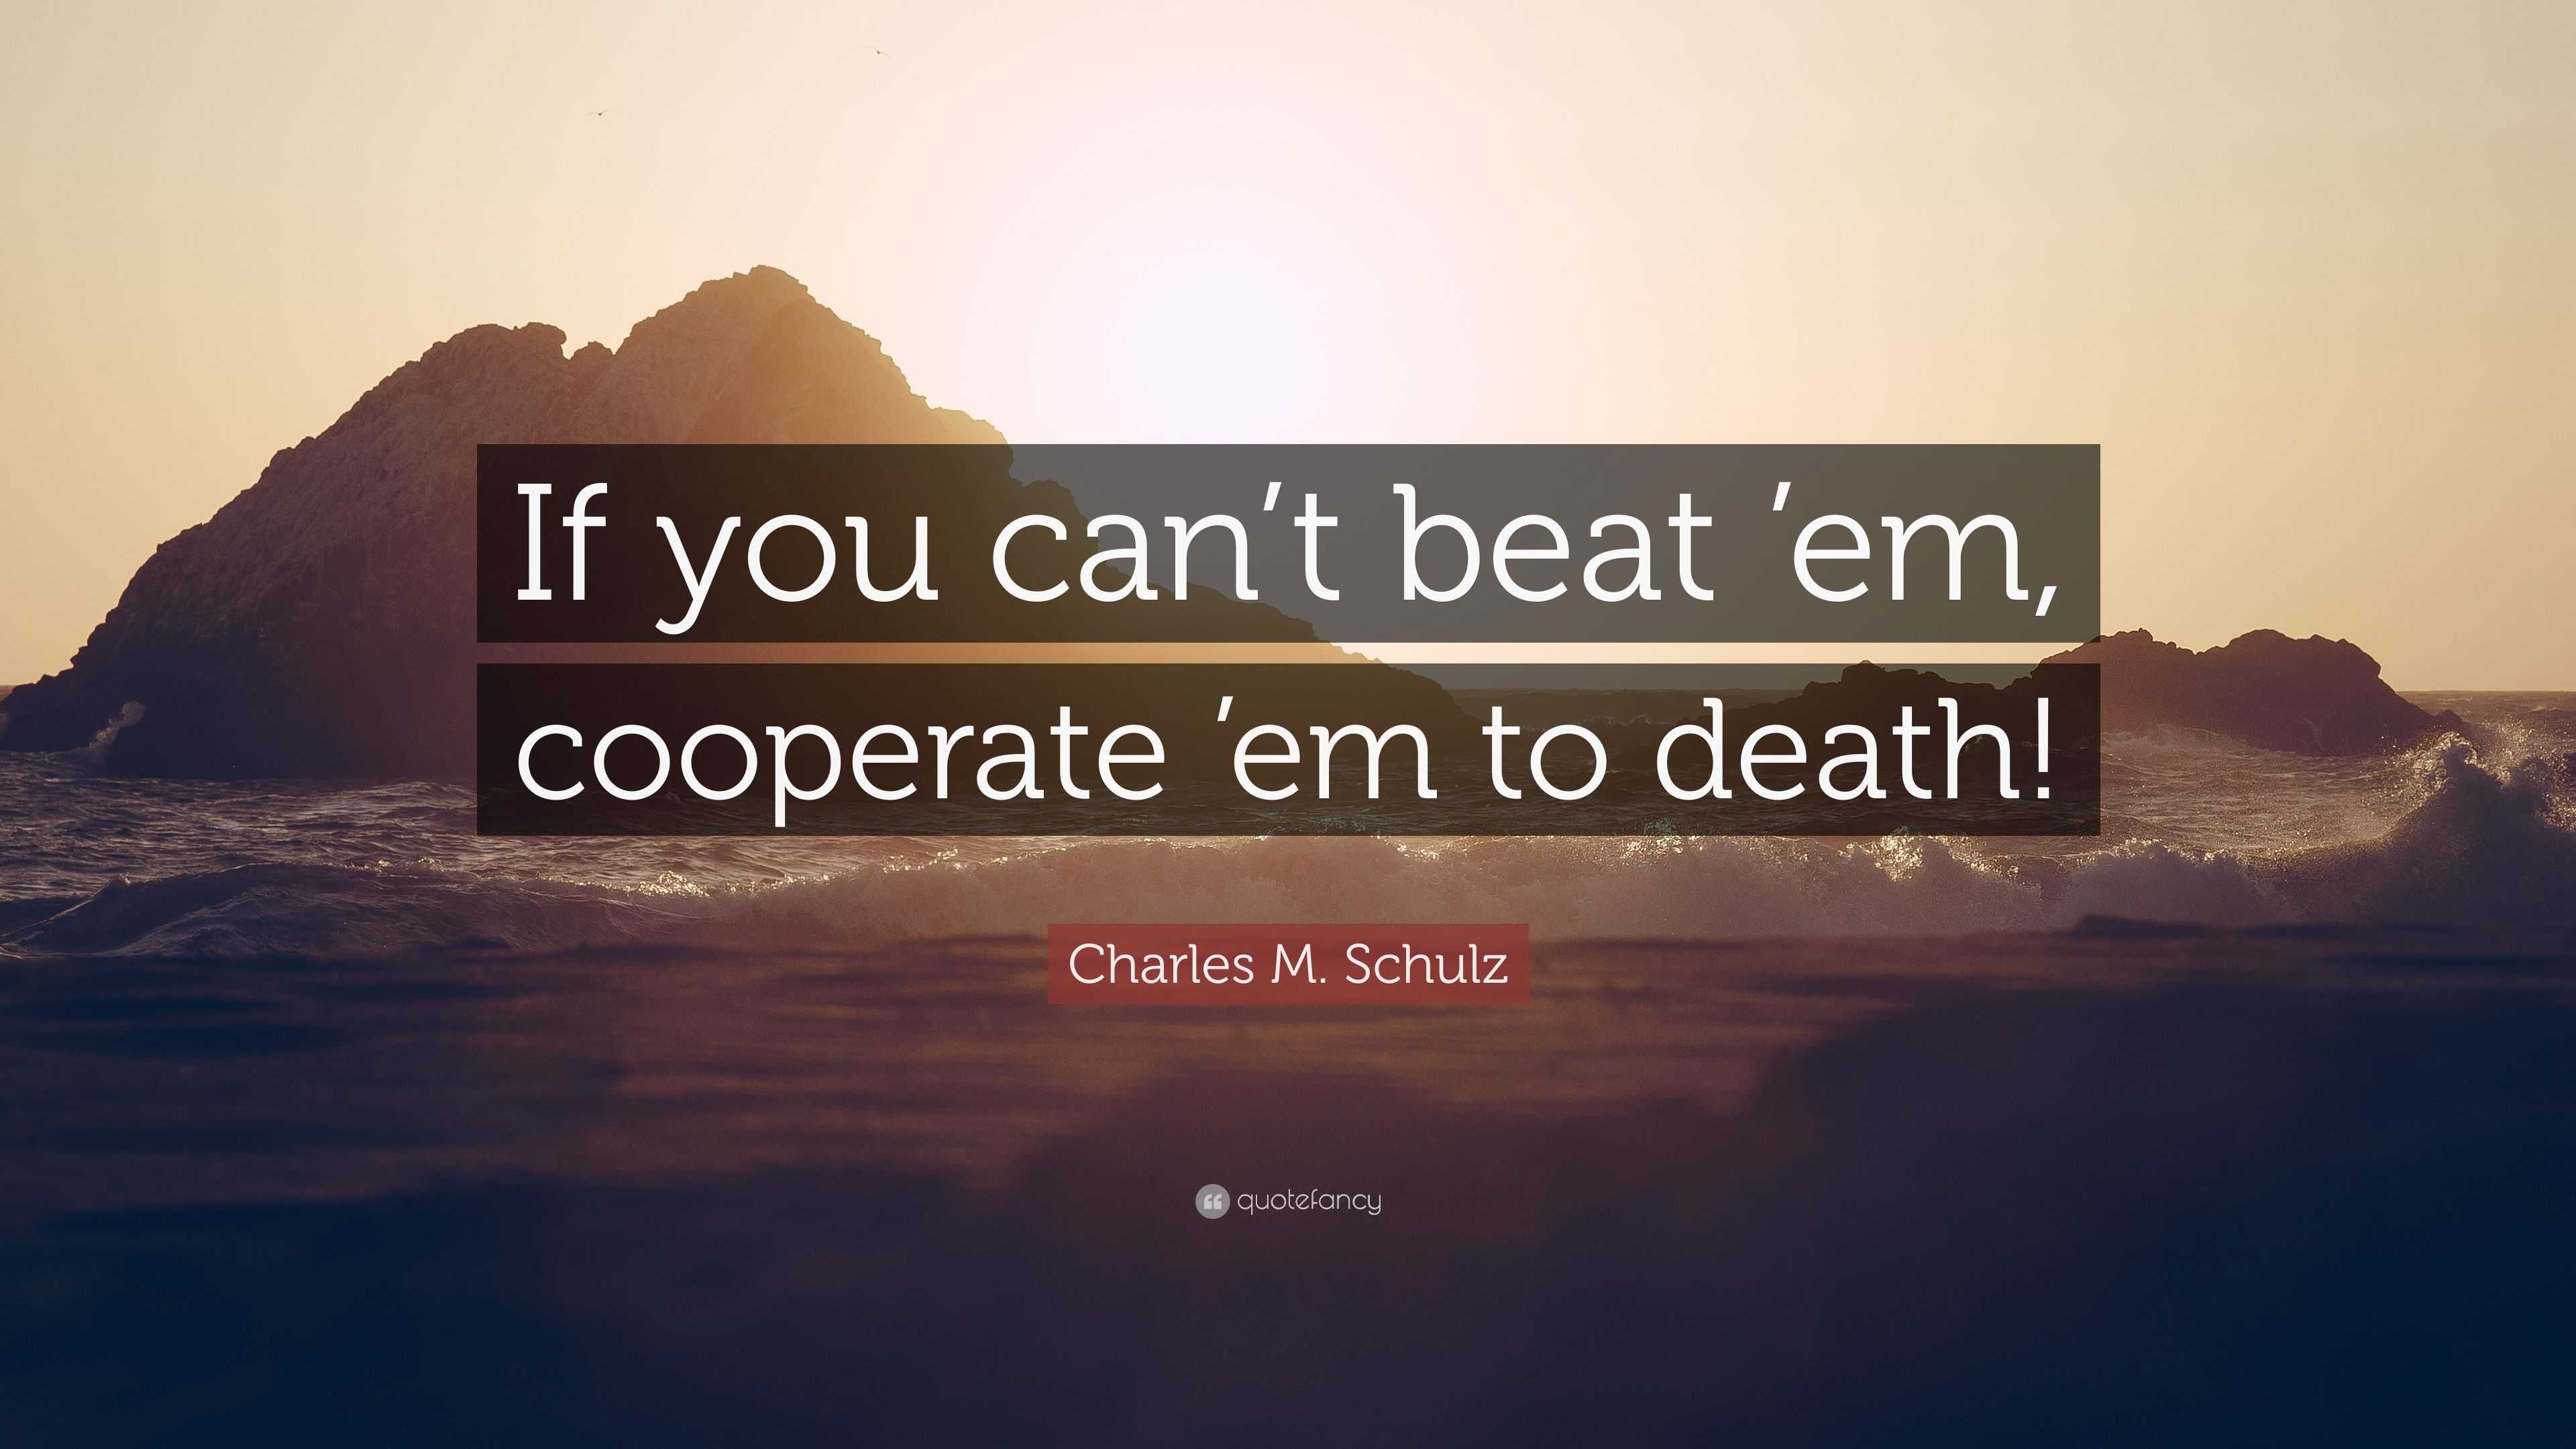 Charles M. Schulz Quote: "If you can't beat 'em, cooperate &...